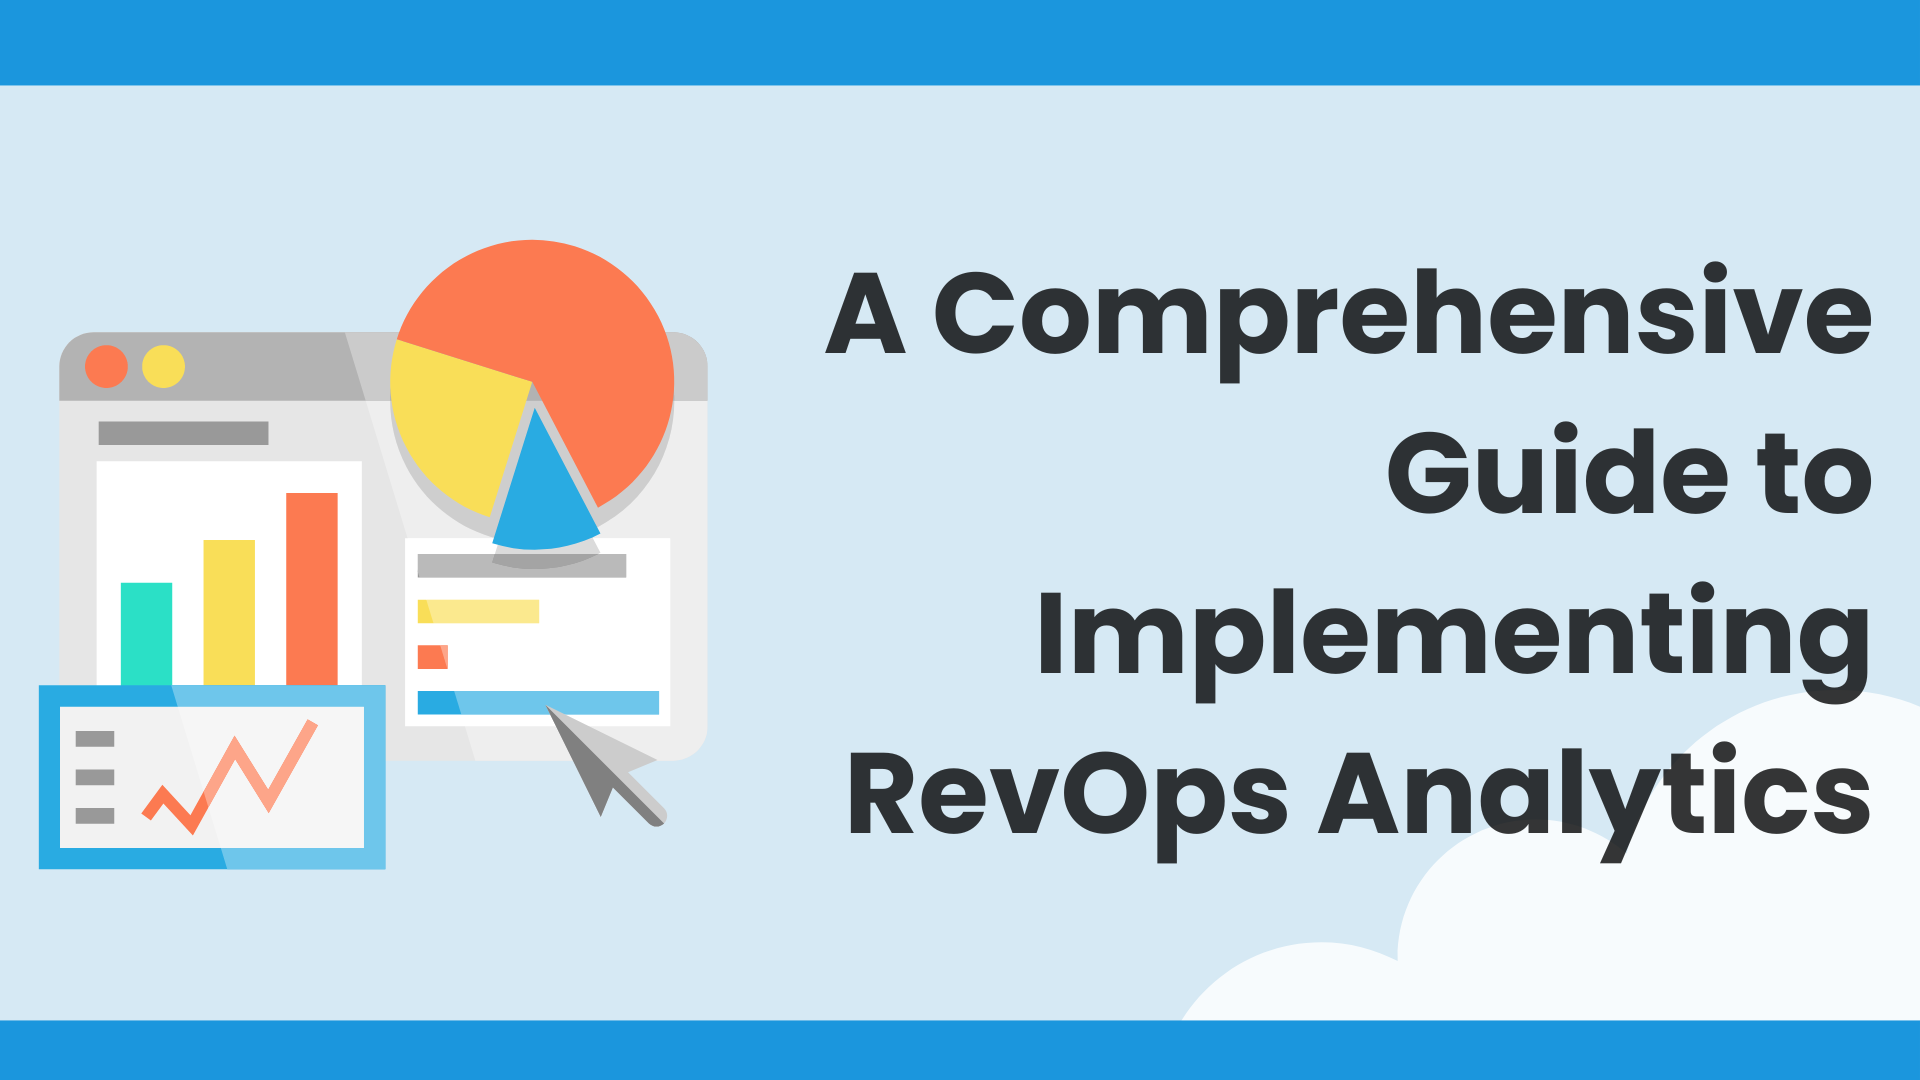 A Comprehensive Guide to Implementing RevOps Analytics